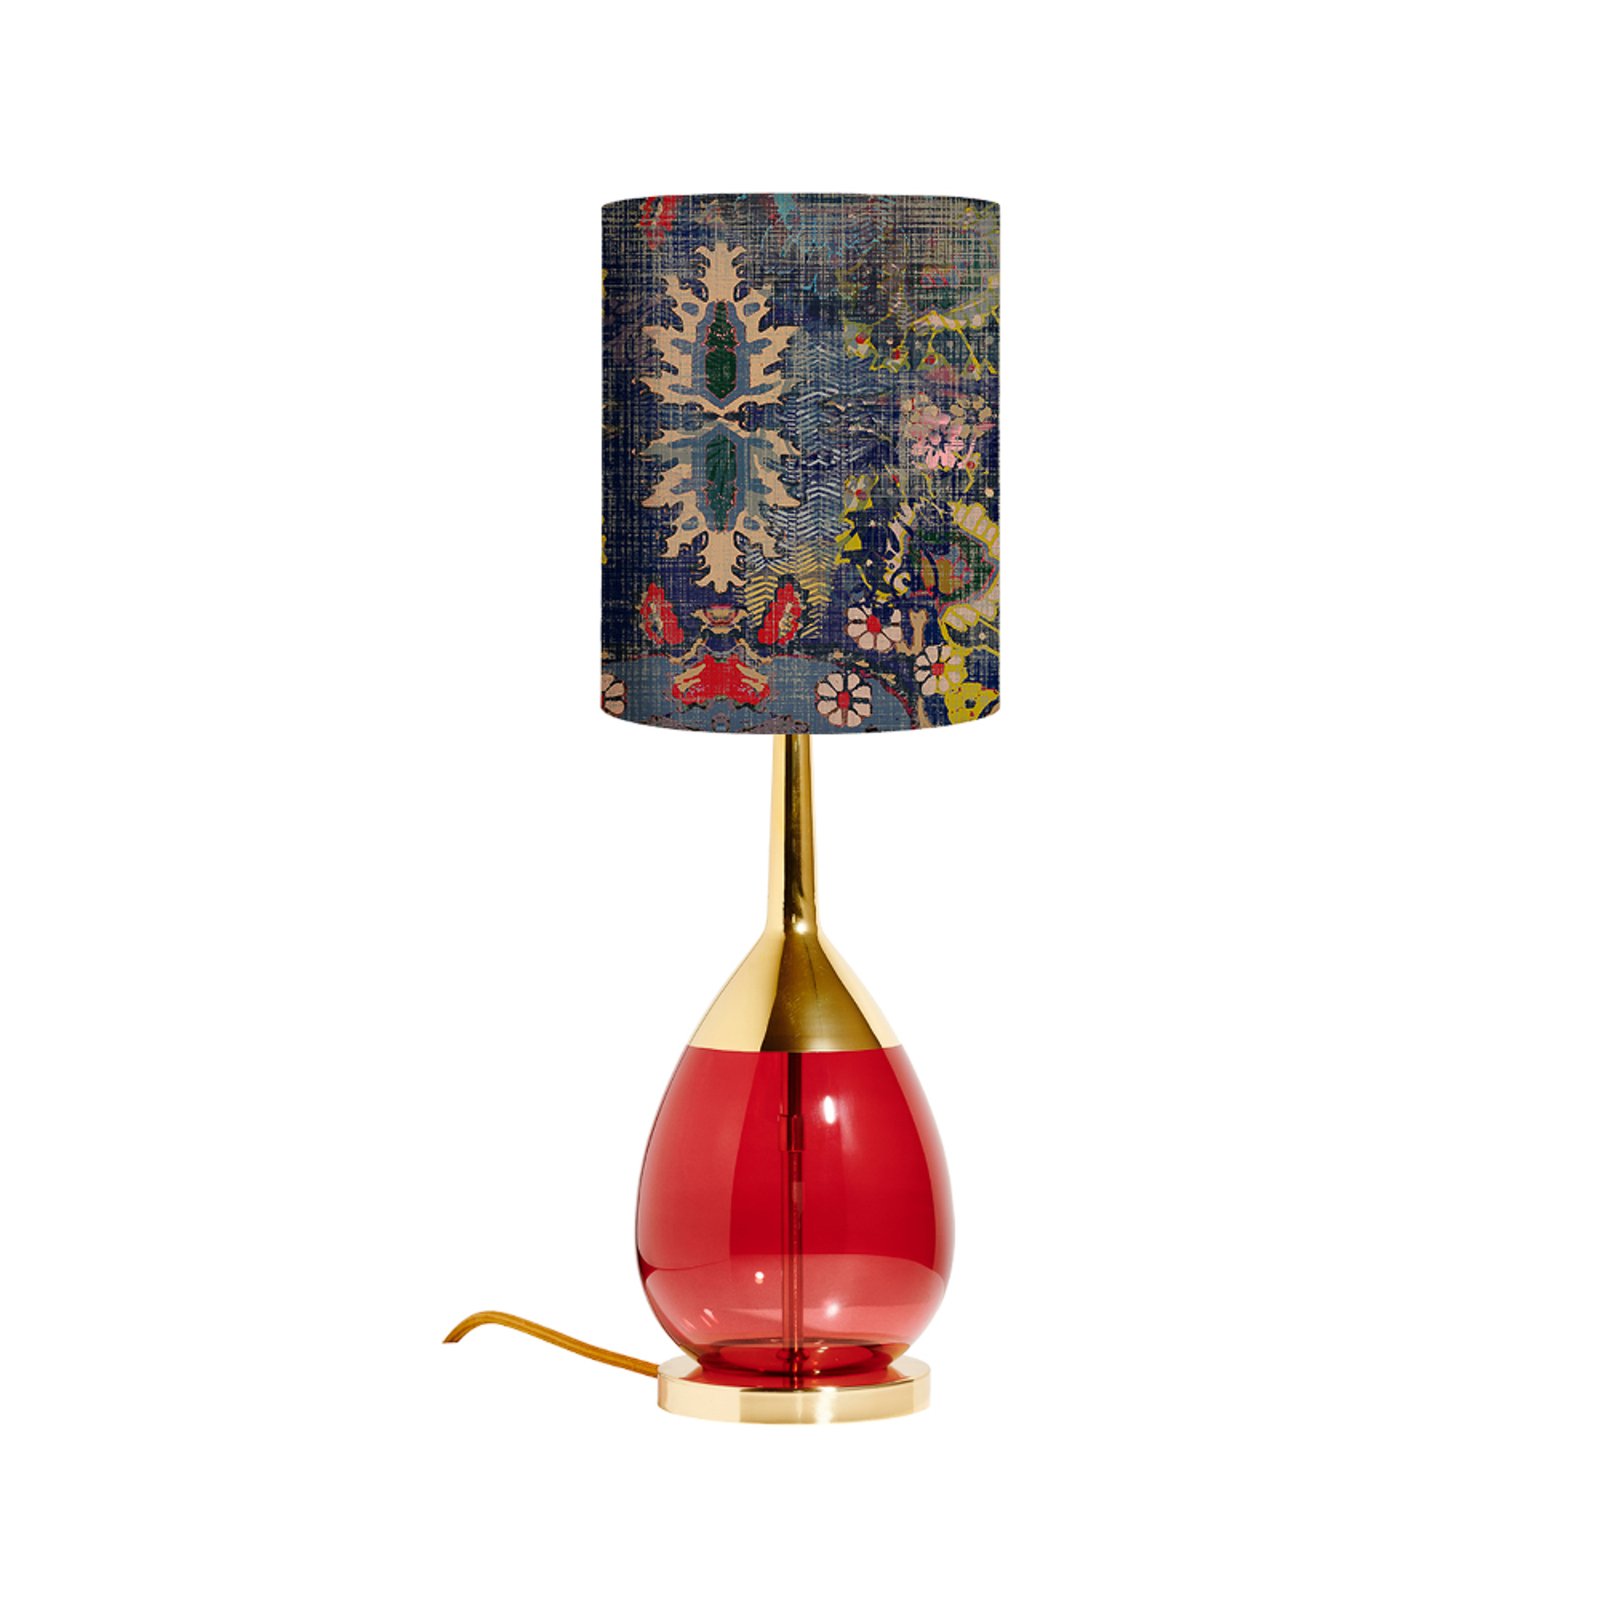 EBB & FLOW Lute S table lamp gold/red Persia blue